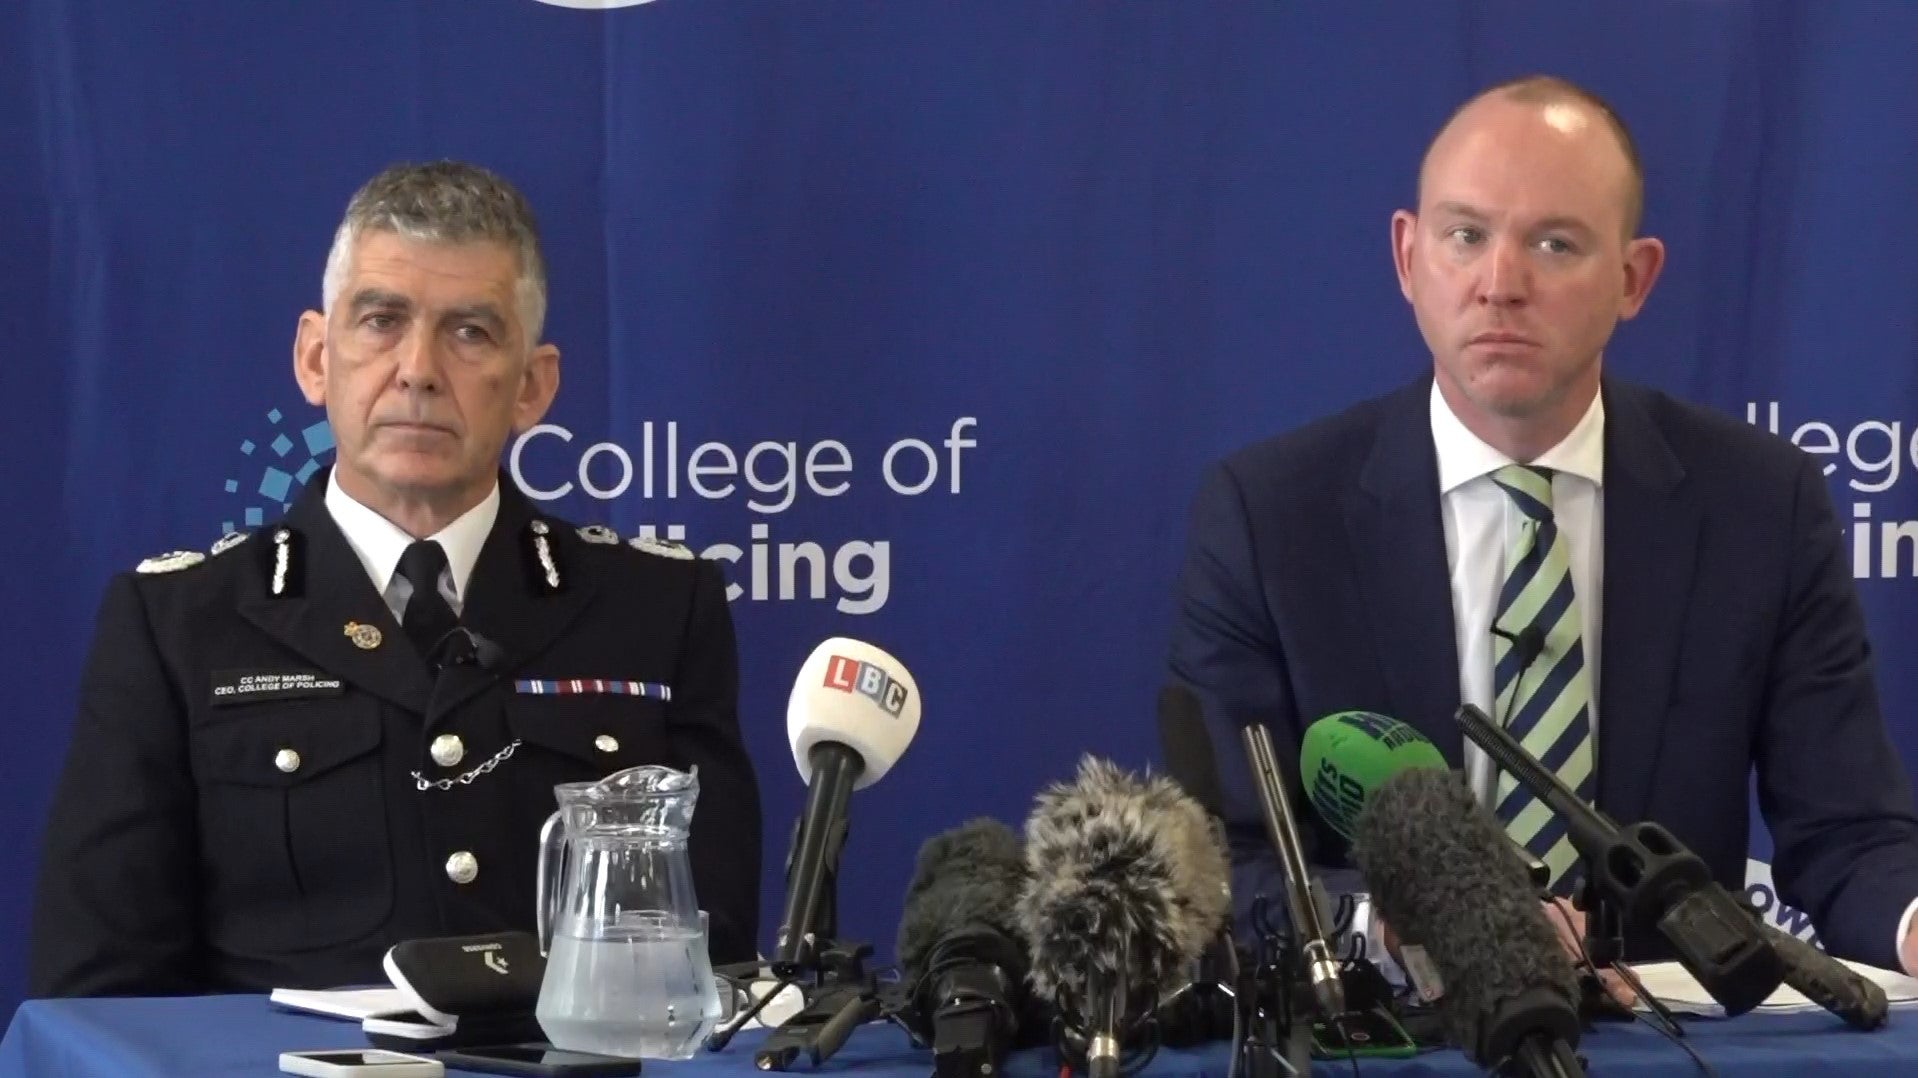 Chief Constable, Andy Marsh (left) and police and crime commissioner for Lancashire, Andrew Snowden at a press conference in Preston on the police handling of the Nicola Bulley investigation